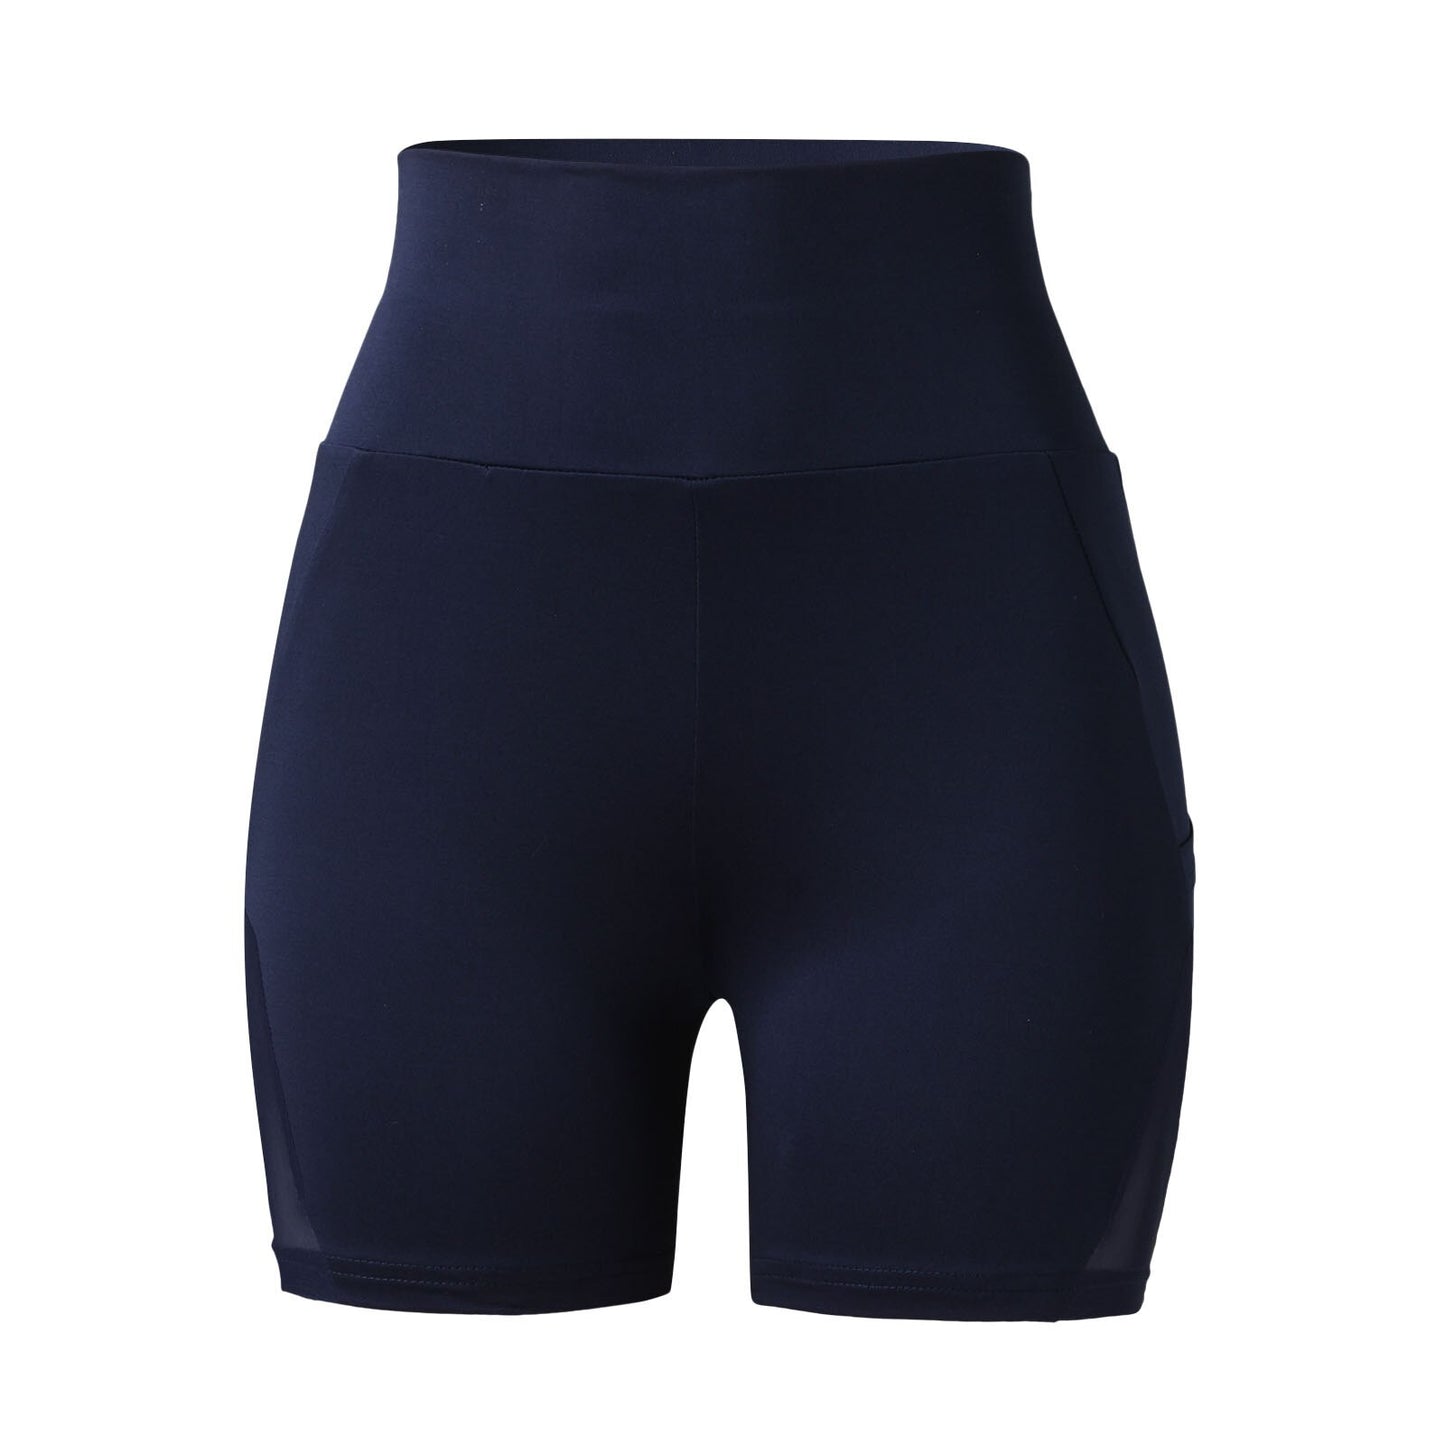 Women's Yoga Quick Dry Shorts with Pockets